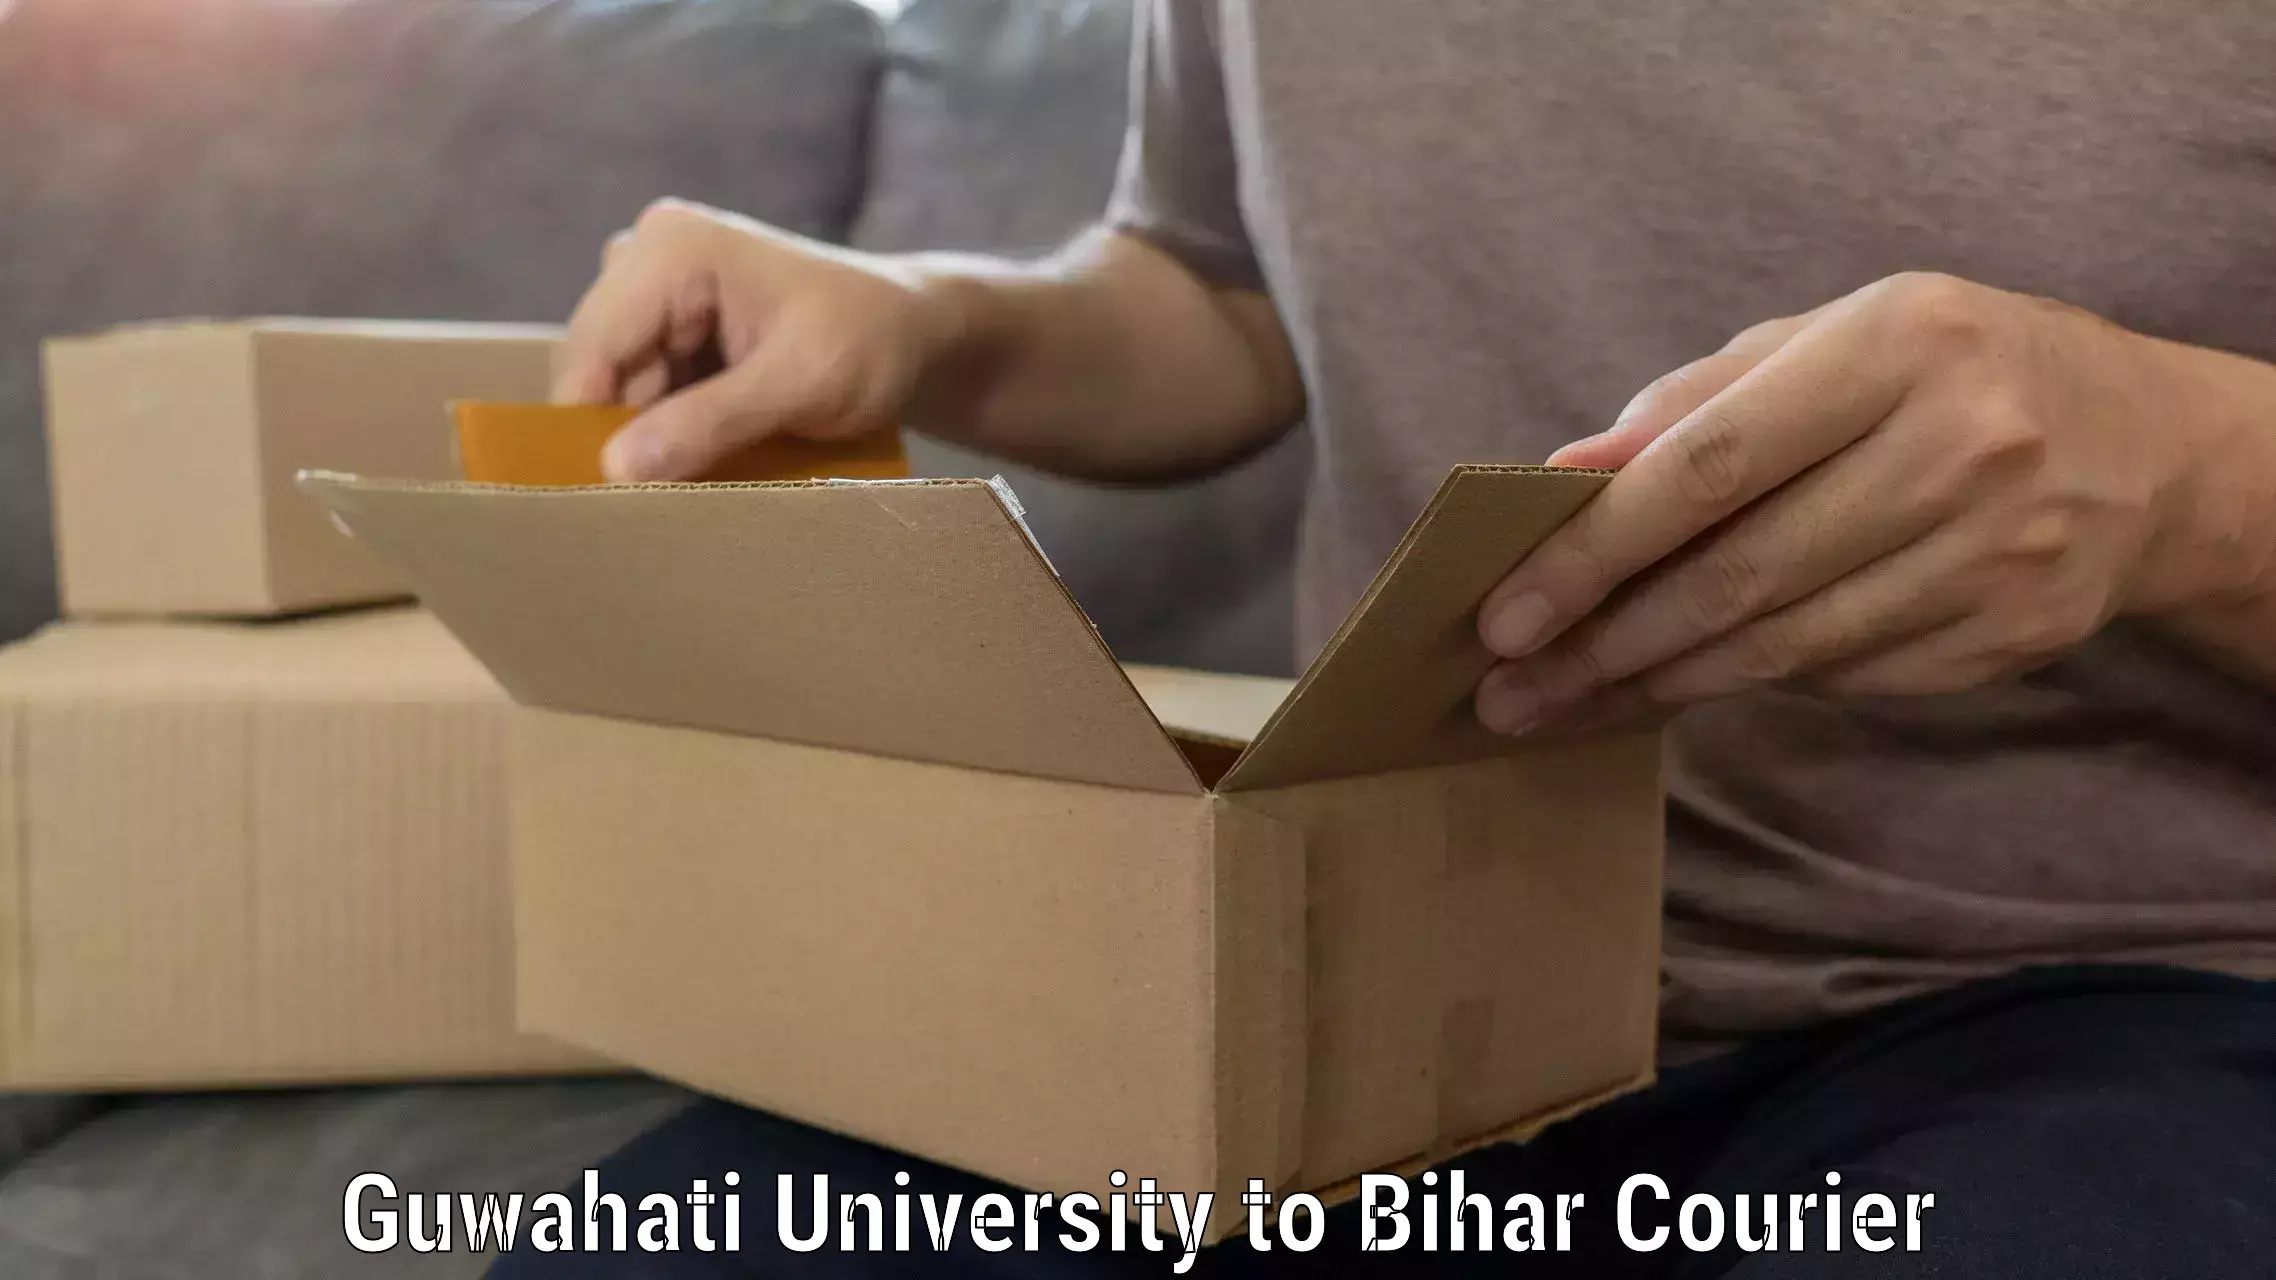 Professional relocation services Guwahati University to Sheonar